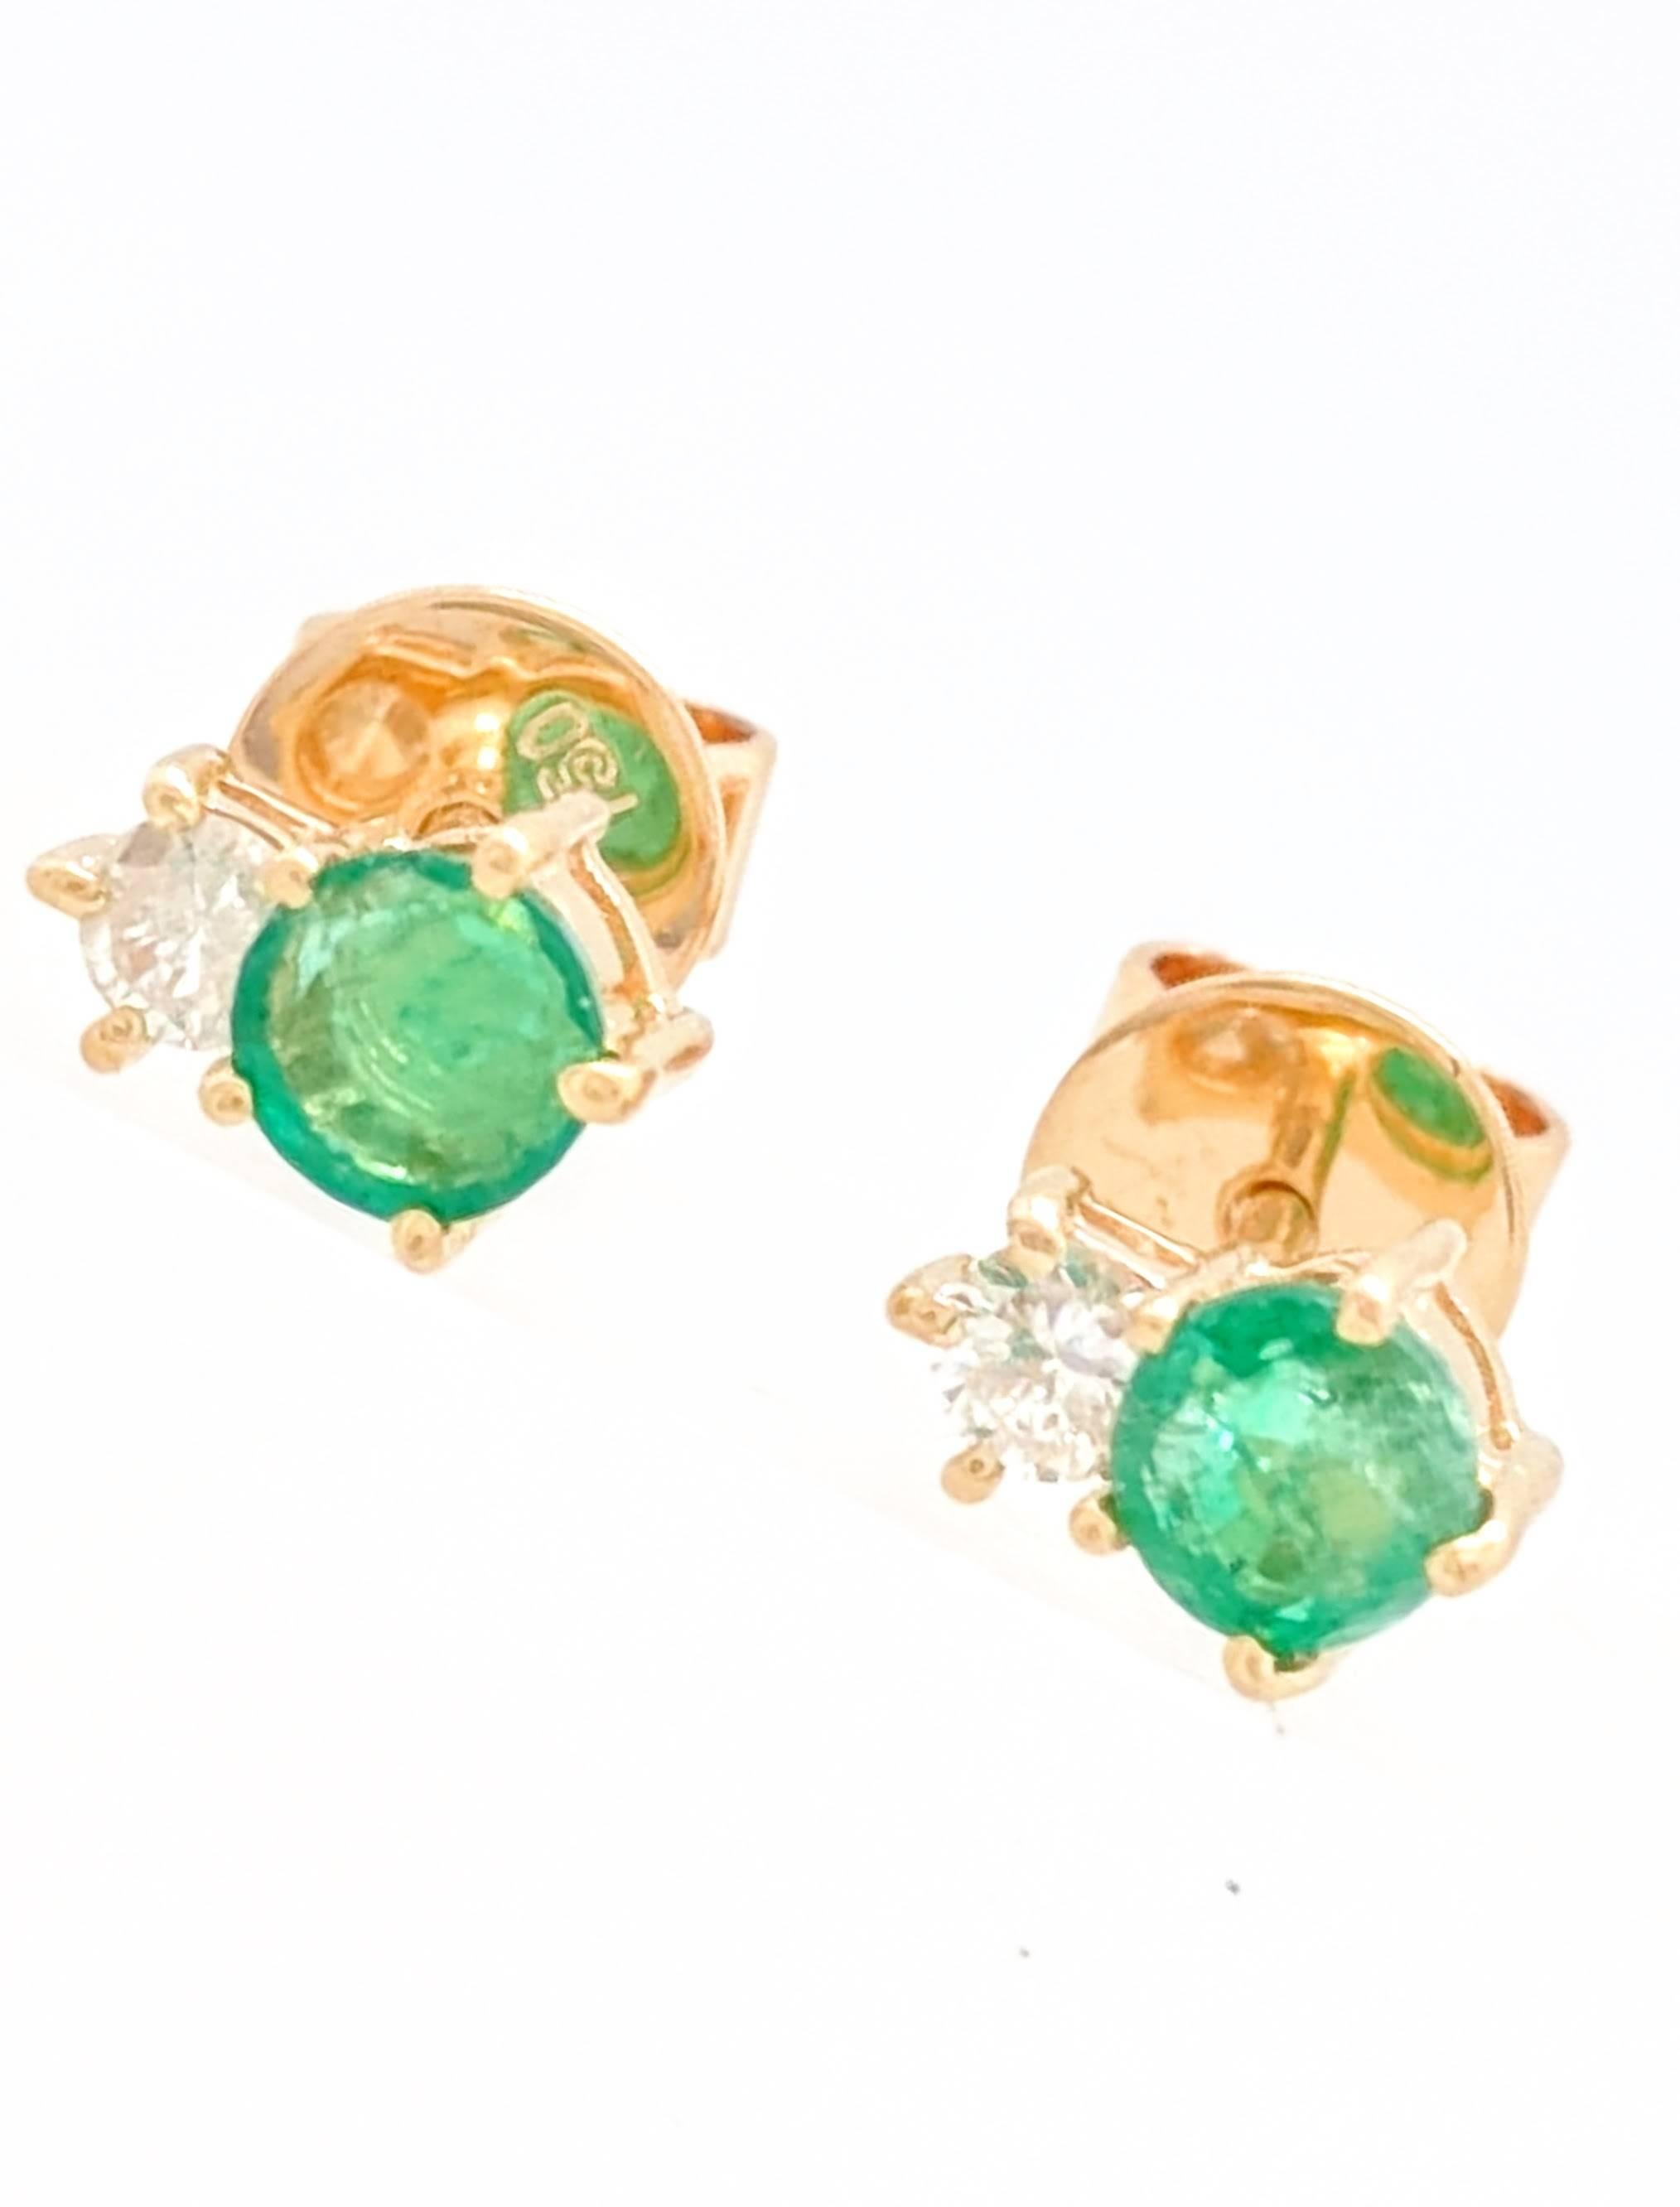 Ladies 18k Yellow Gold Emerald & Diamond Stud Earrings

You are viewing a beautiful pair of emerald & diamond stud earrings. These earrings are crafted from 18k yellow gold and weighs 1.5 grams. Each earring features (1) .20ct natural round emerald